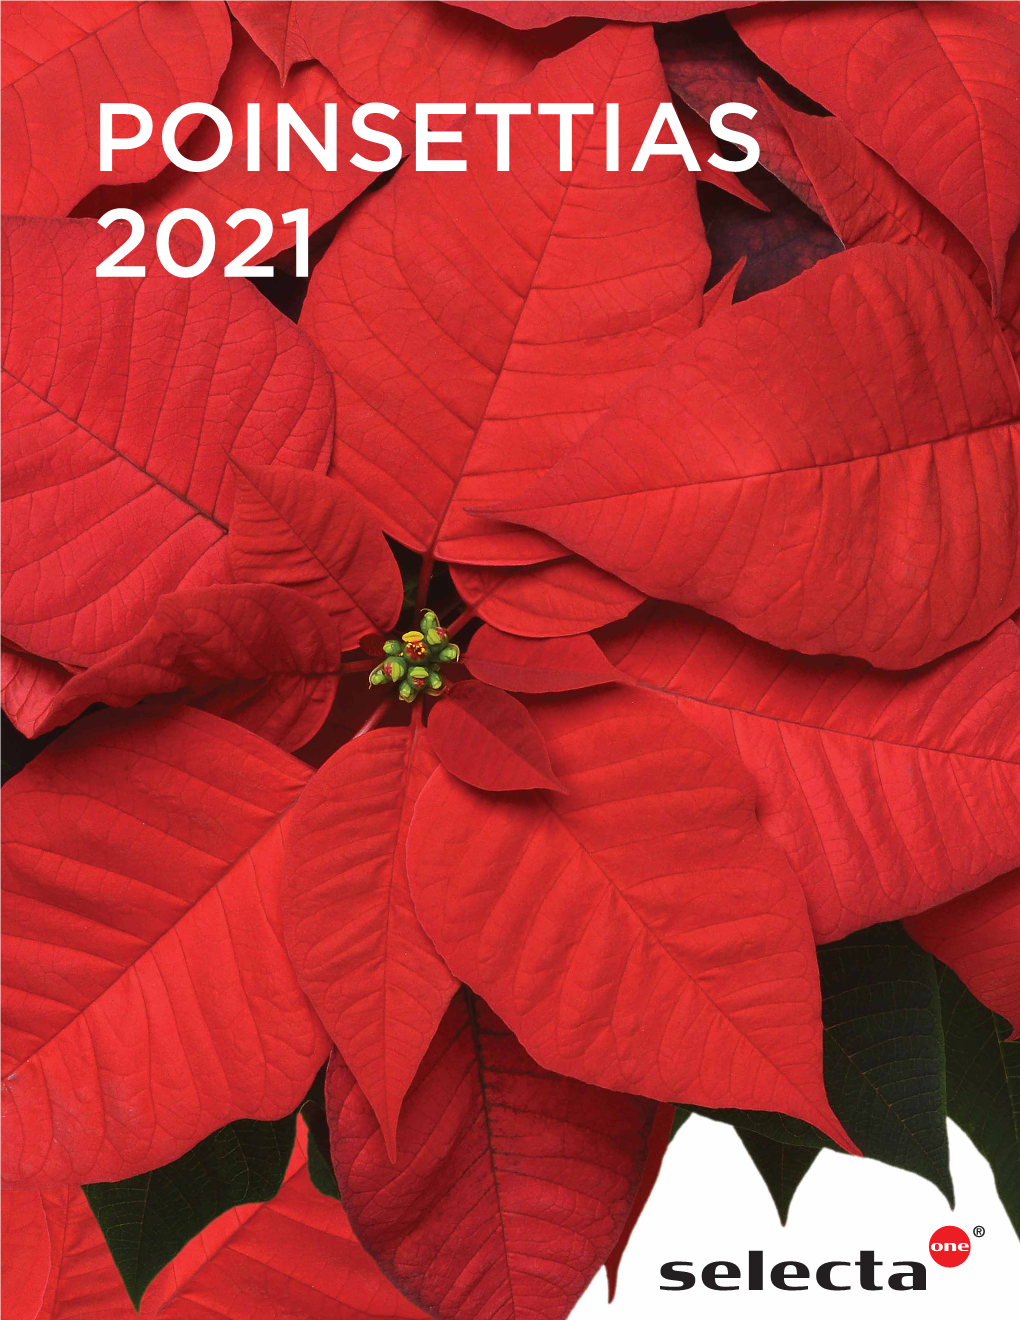 Poinsettias 2021 Table of Contents